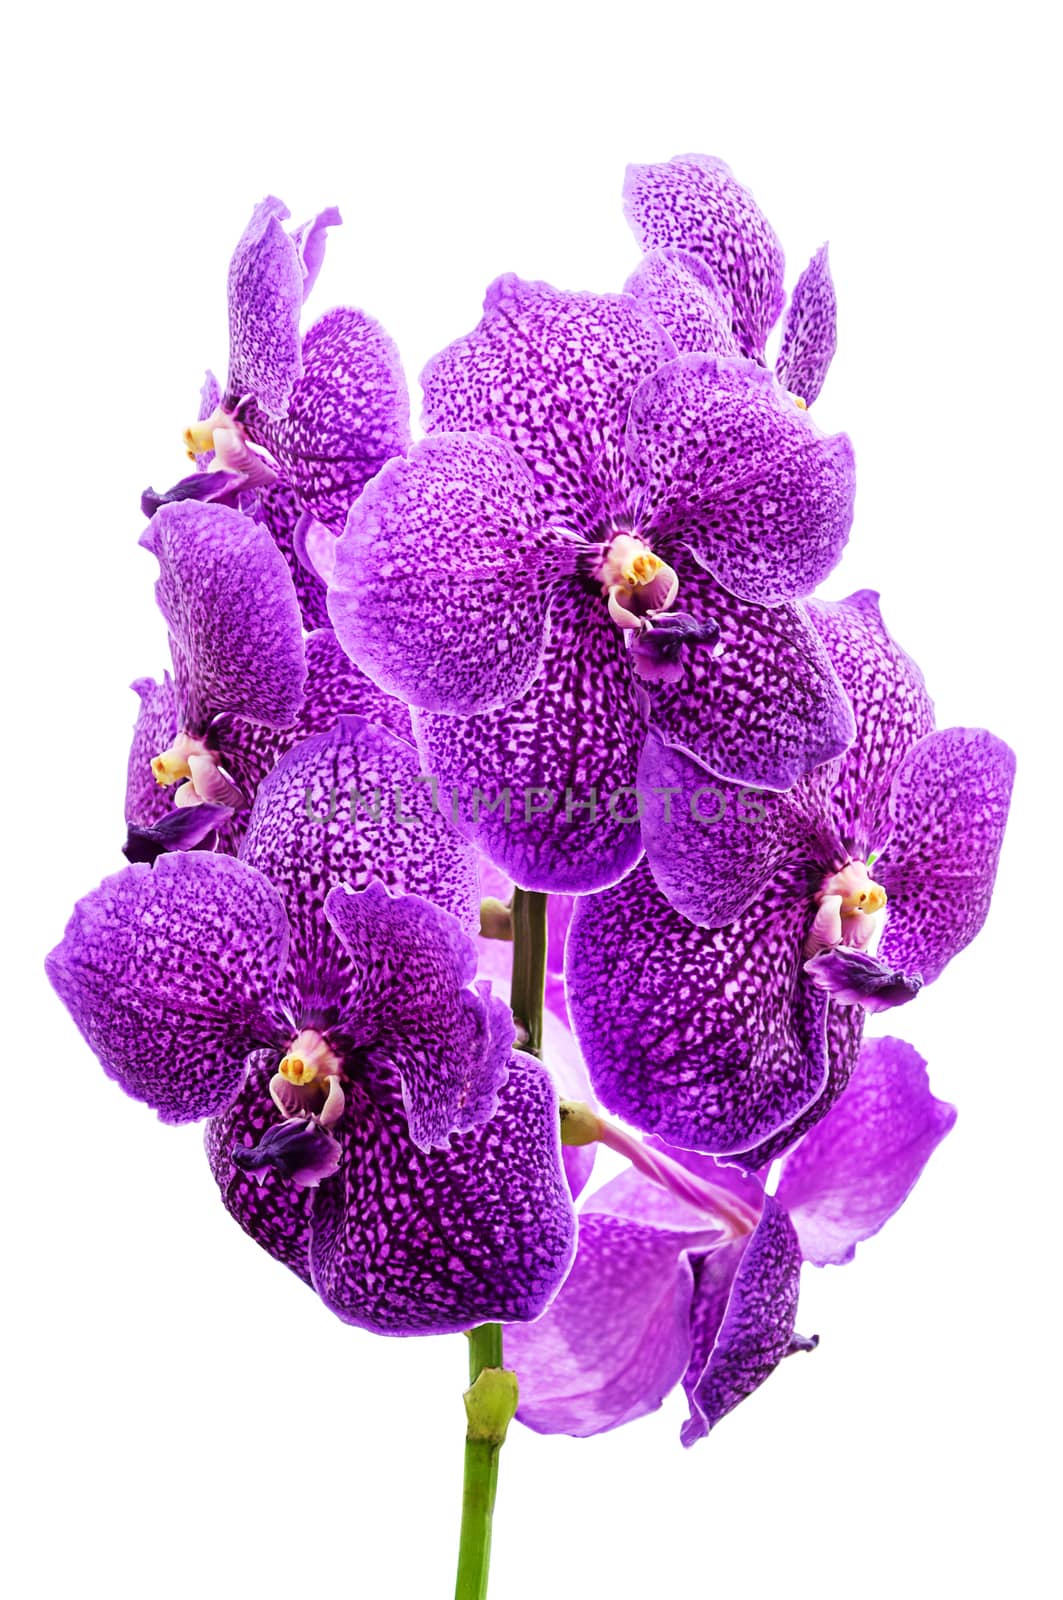 Orchid flowers isolated on white background 